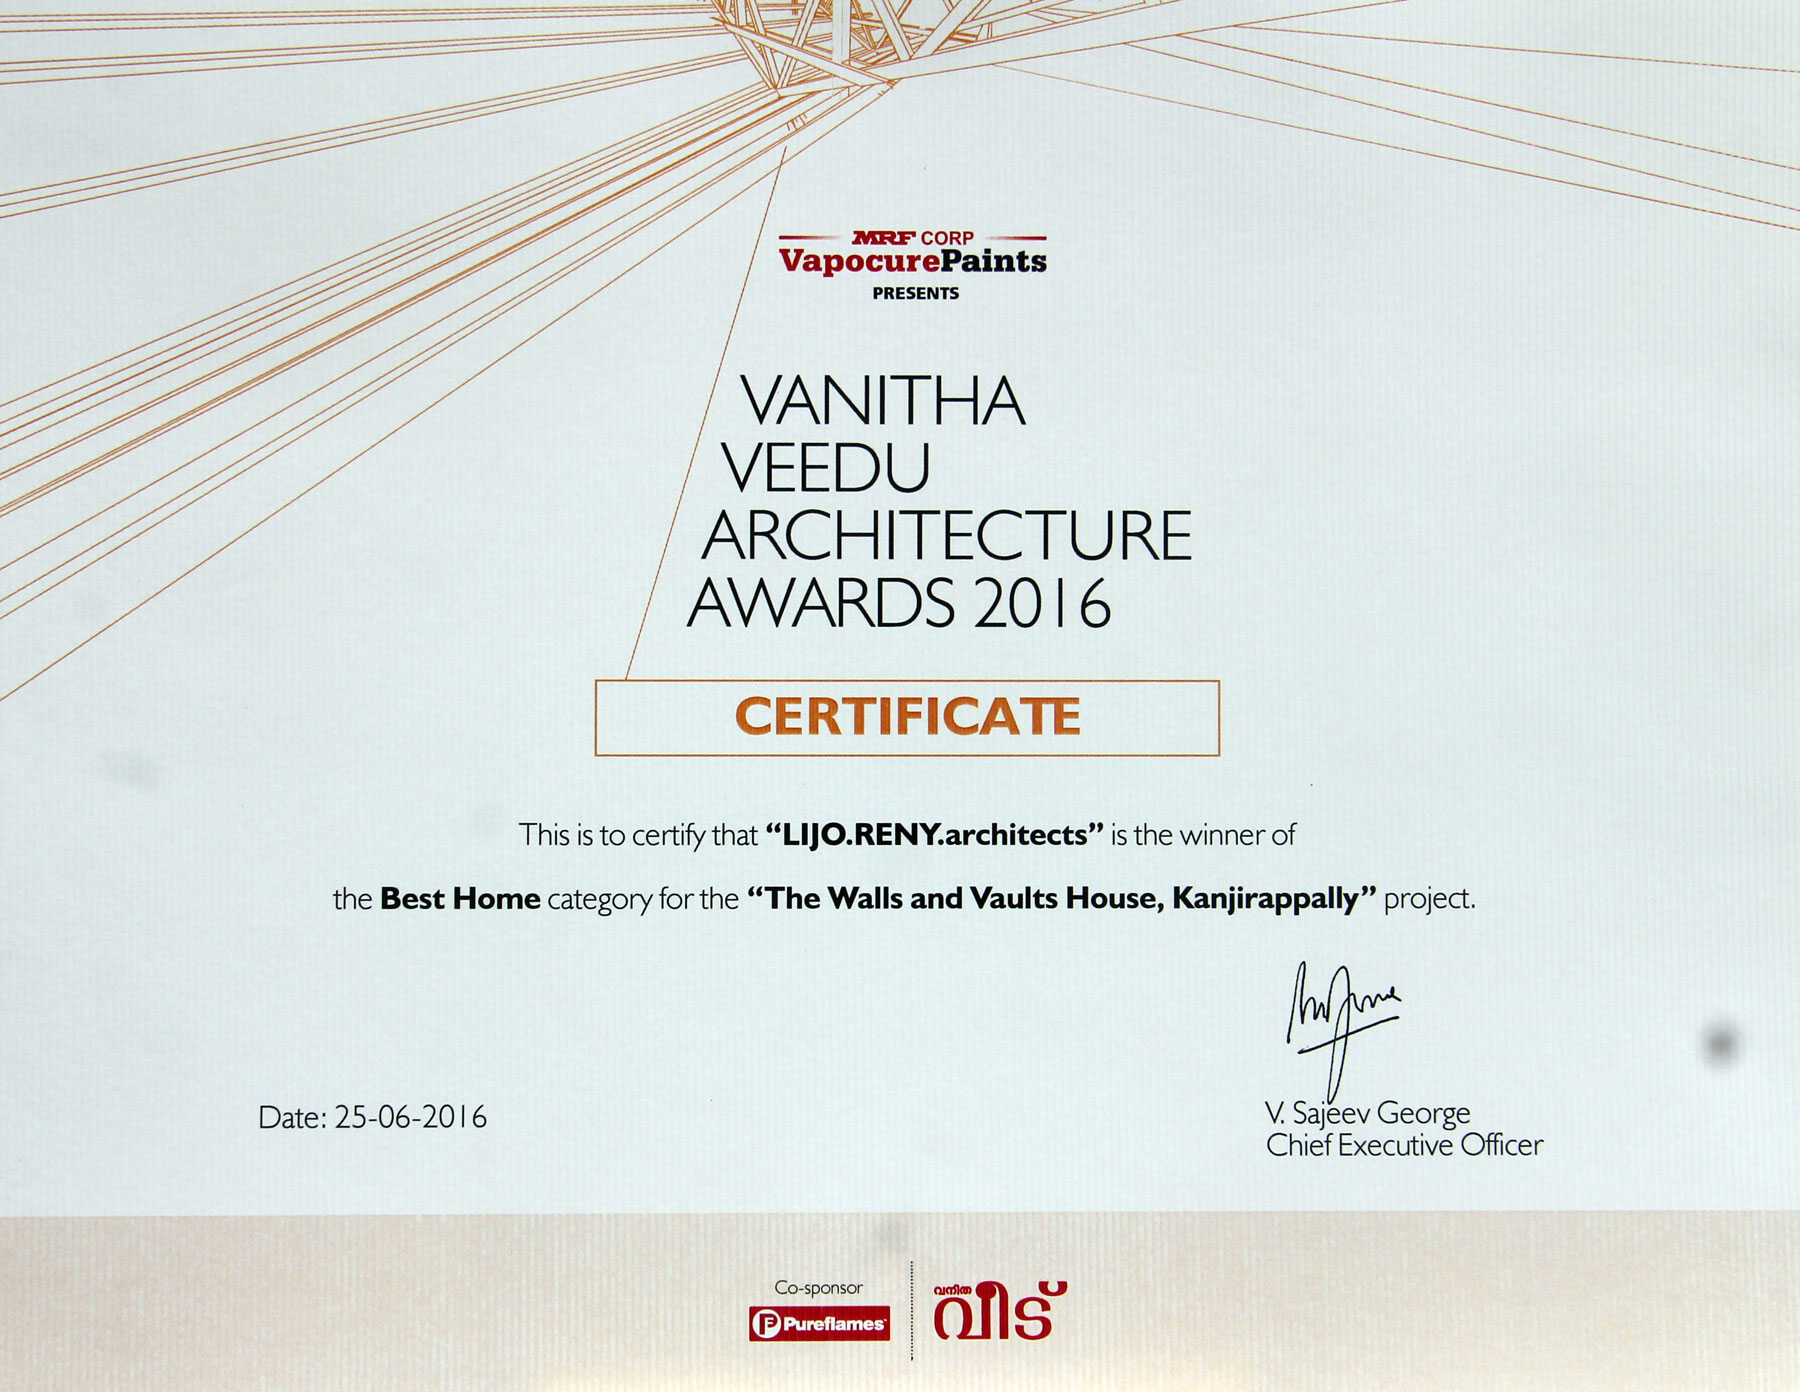 lijo-reny-architects-wins-the-best-home-award-and-best-home-commendation-at-the-vanitha-veedu-architecture-awards-2016-3